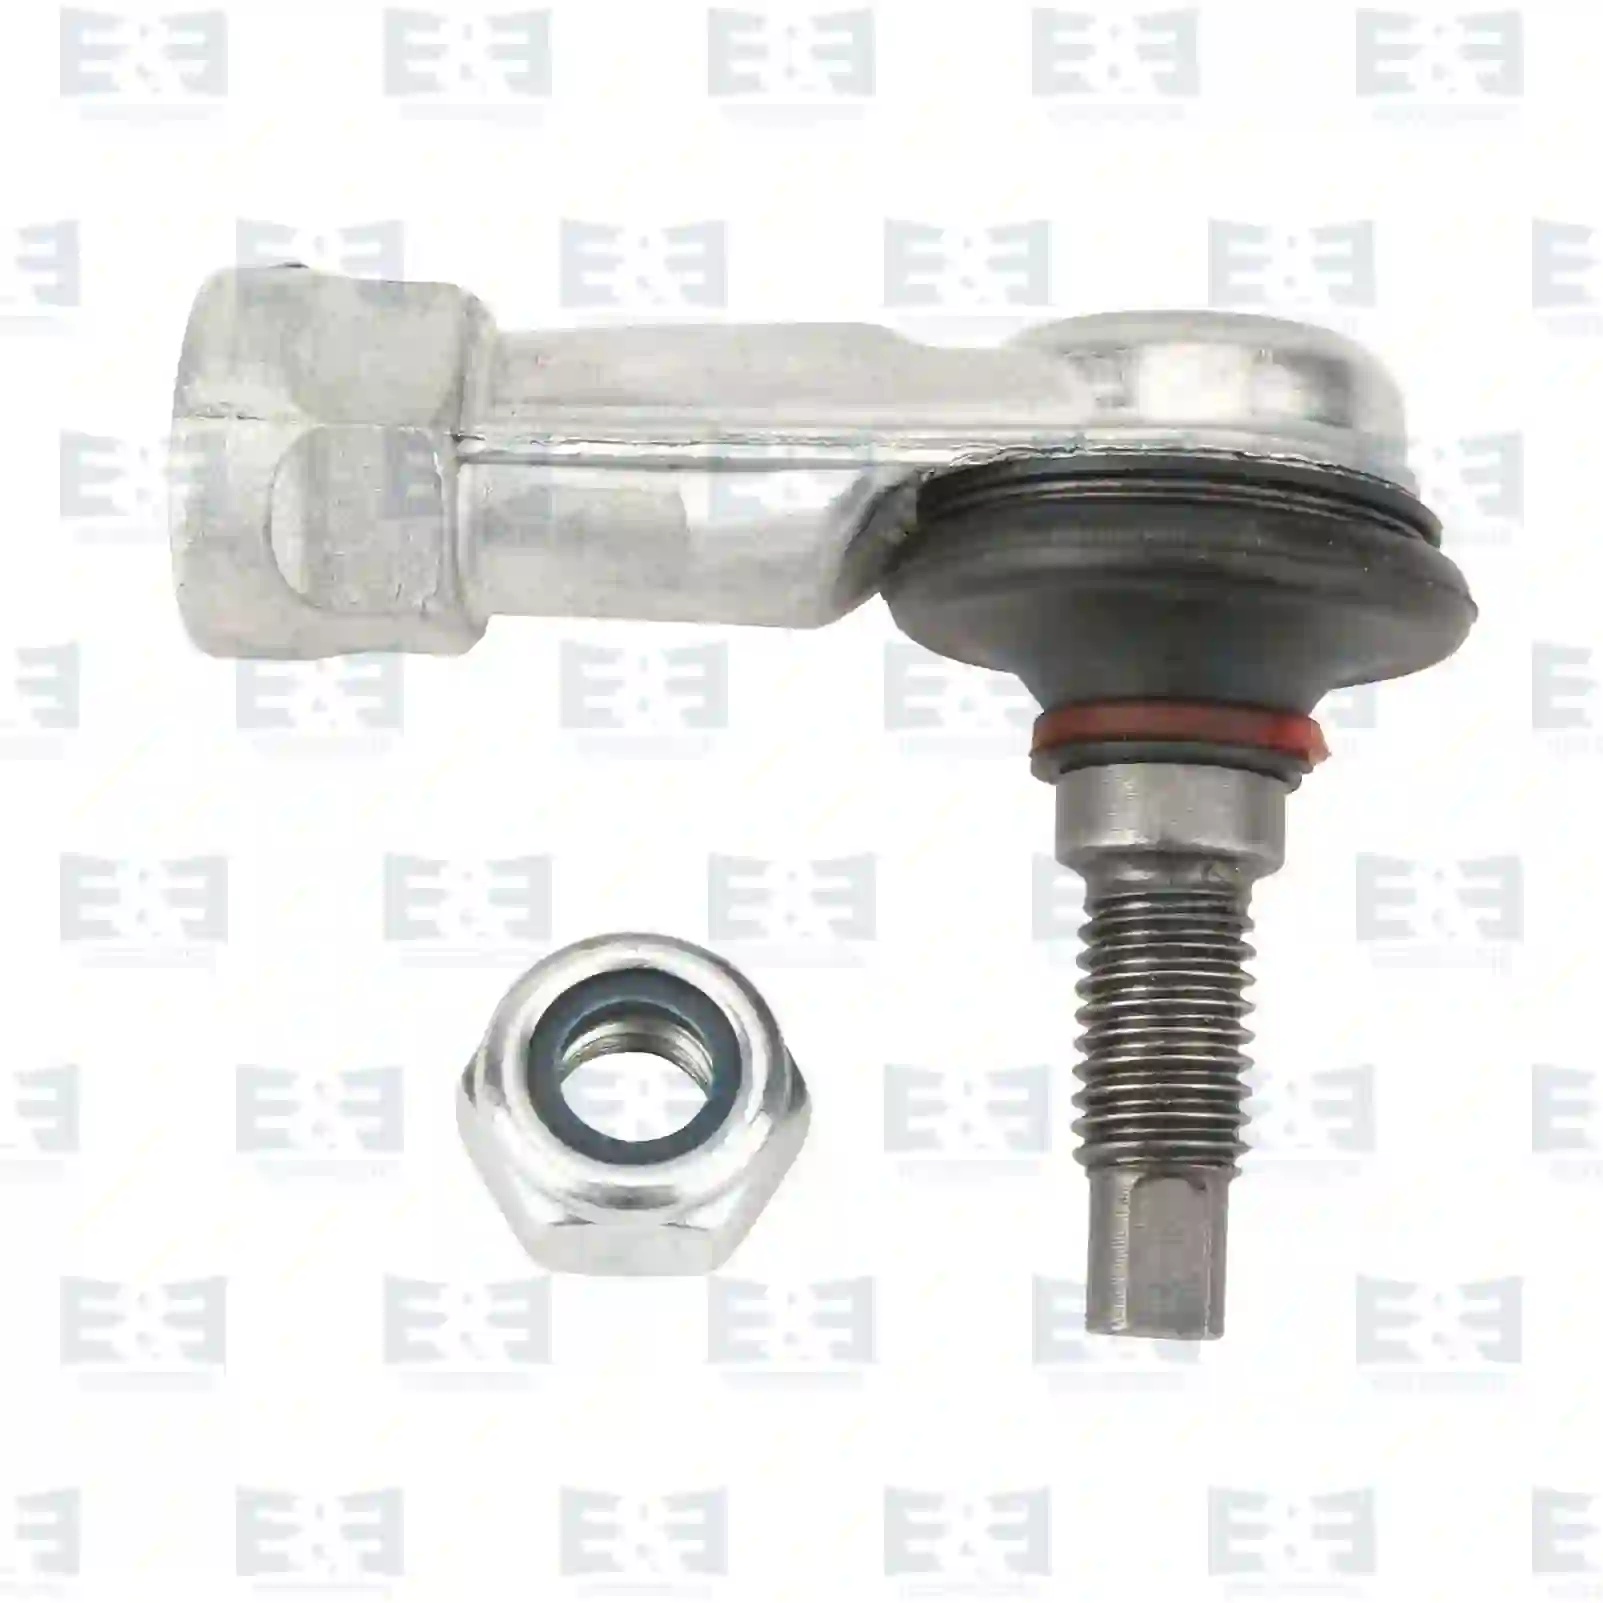 Gear Shift Lever Ball joint, left hand thread, EE No 2E2279492 ,  oem no:00021927, 0140363, 0592106, 0656084, 1249088, 140363, 1457400, 592106, 656084, 42485638, 191708, 7394145, 02524128, 08198187, 42485638, 00191708, 02524128, 08198187, 42485638, 500056188, 5001000134, 8198187, 2150021200, 5004154, 81953016063, 81953016131, 81953016171, 81953016174, 90900989011, 0002684789, 0002686189, 0002689789, 3662680489, 011010221, 34437-9X403, 5006017504, 7401190132, 1384897, 305319, 371451, 421325, 523743, 525732, 527055, 8321999836, 0928500070, 0732107019, 1190132, 11901329, 1696684, ZG40134-0008 E&E Truck Spare Parts | Truck Spare Parts, Auotomotive Spare Parts